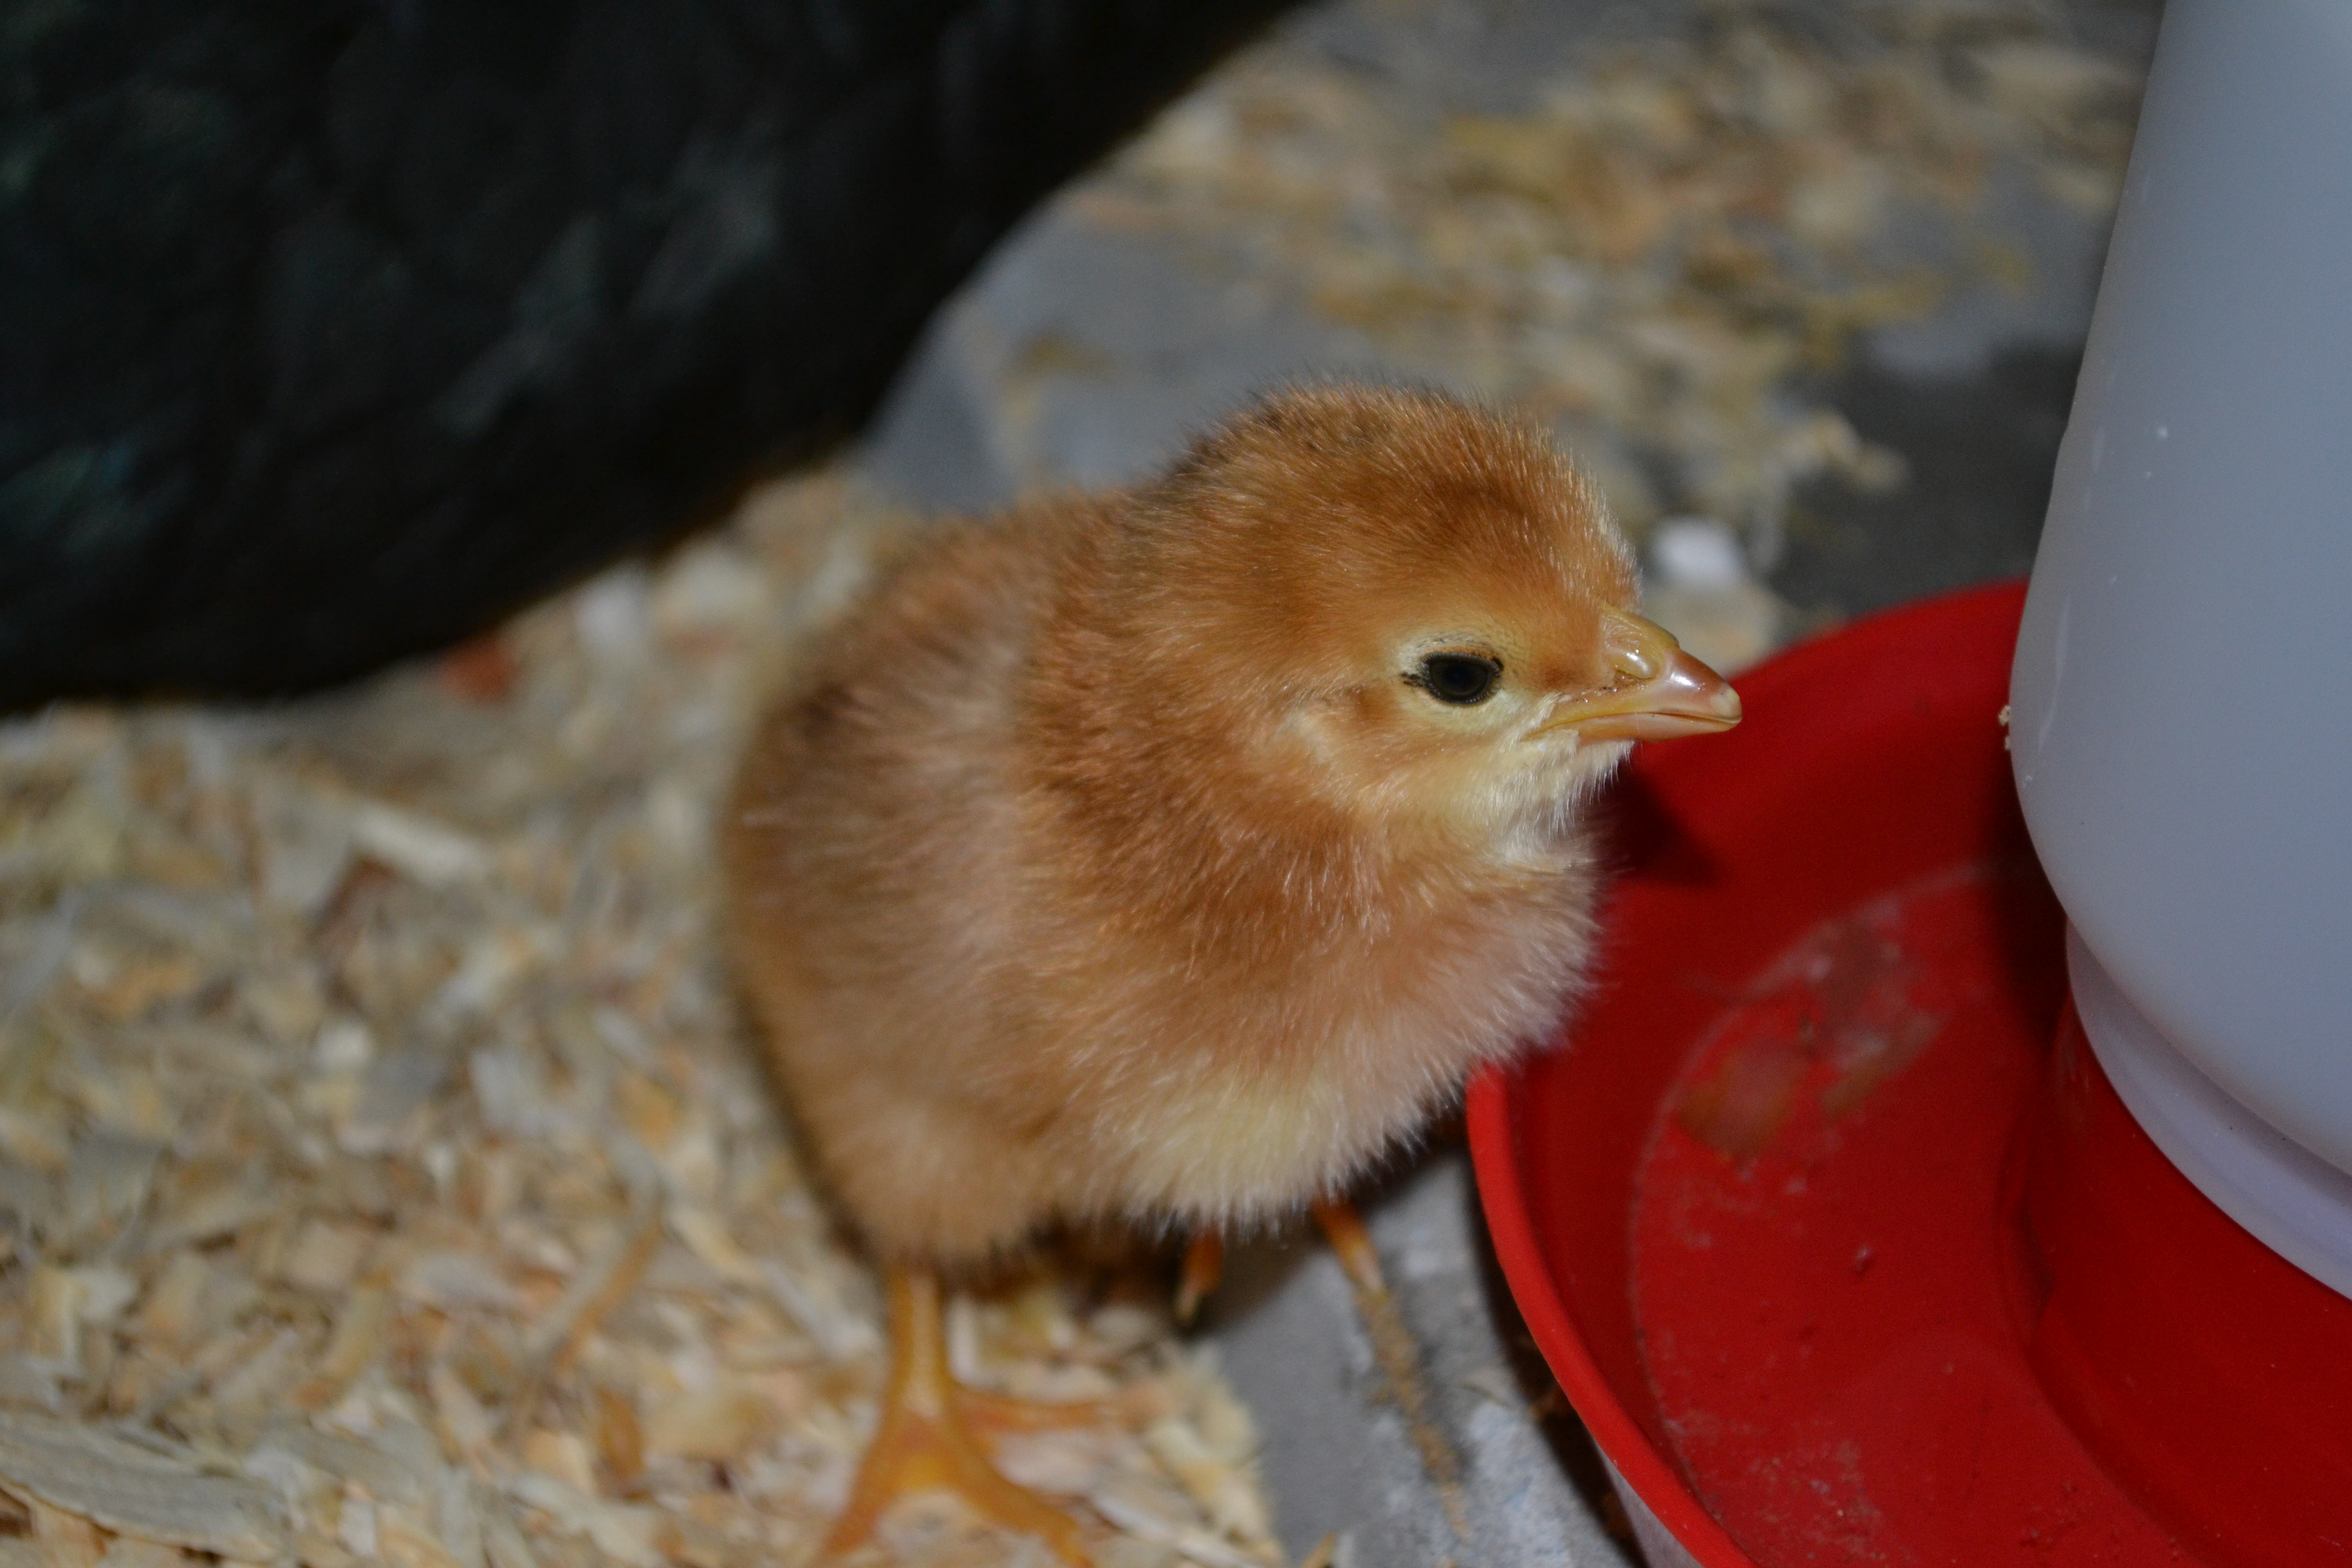 My first ever baby chick. 2-day old EE hatched by broody OE Cleo.